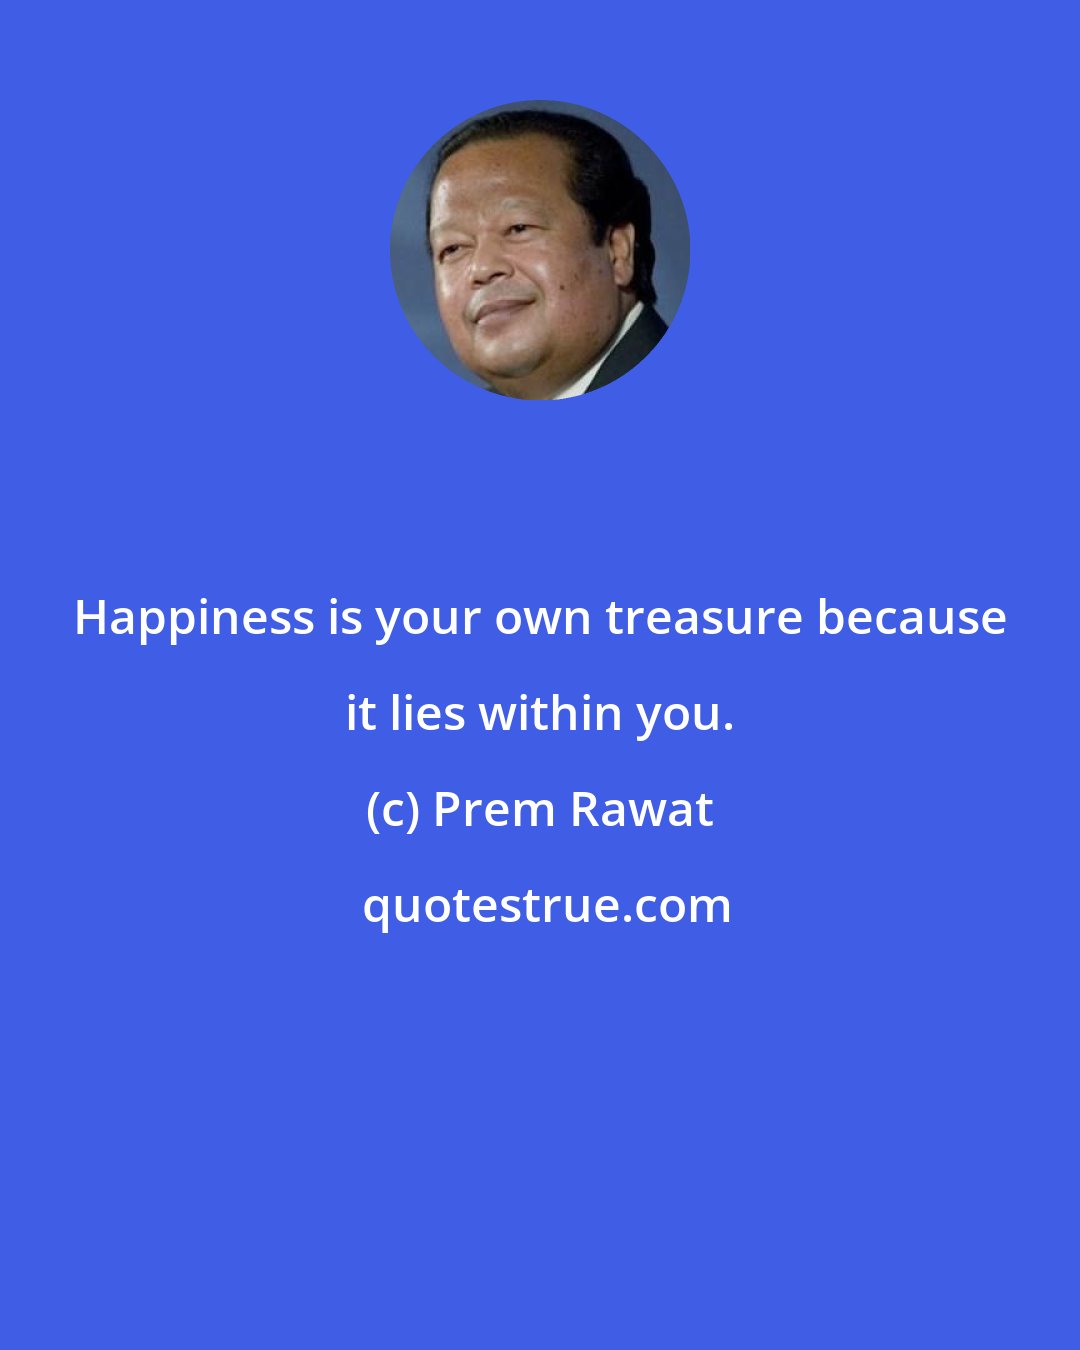 Prem Rawat: Happiness is your own treasure because it lies within you.